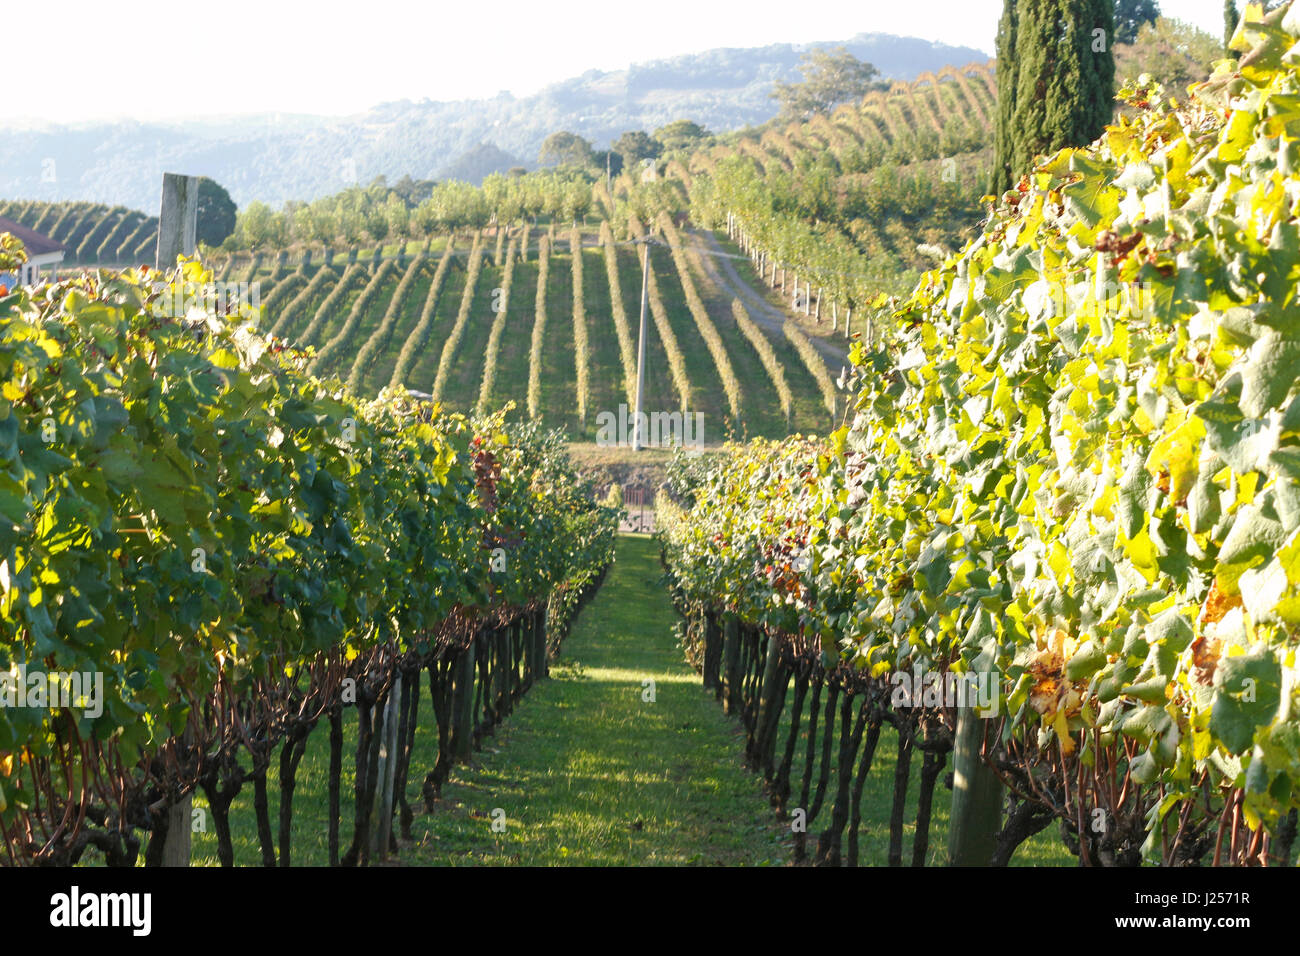 A large expanse of vineyards under the late afternoon sun. Stock Photo